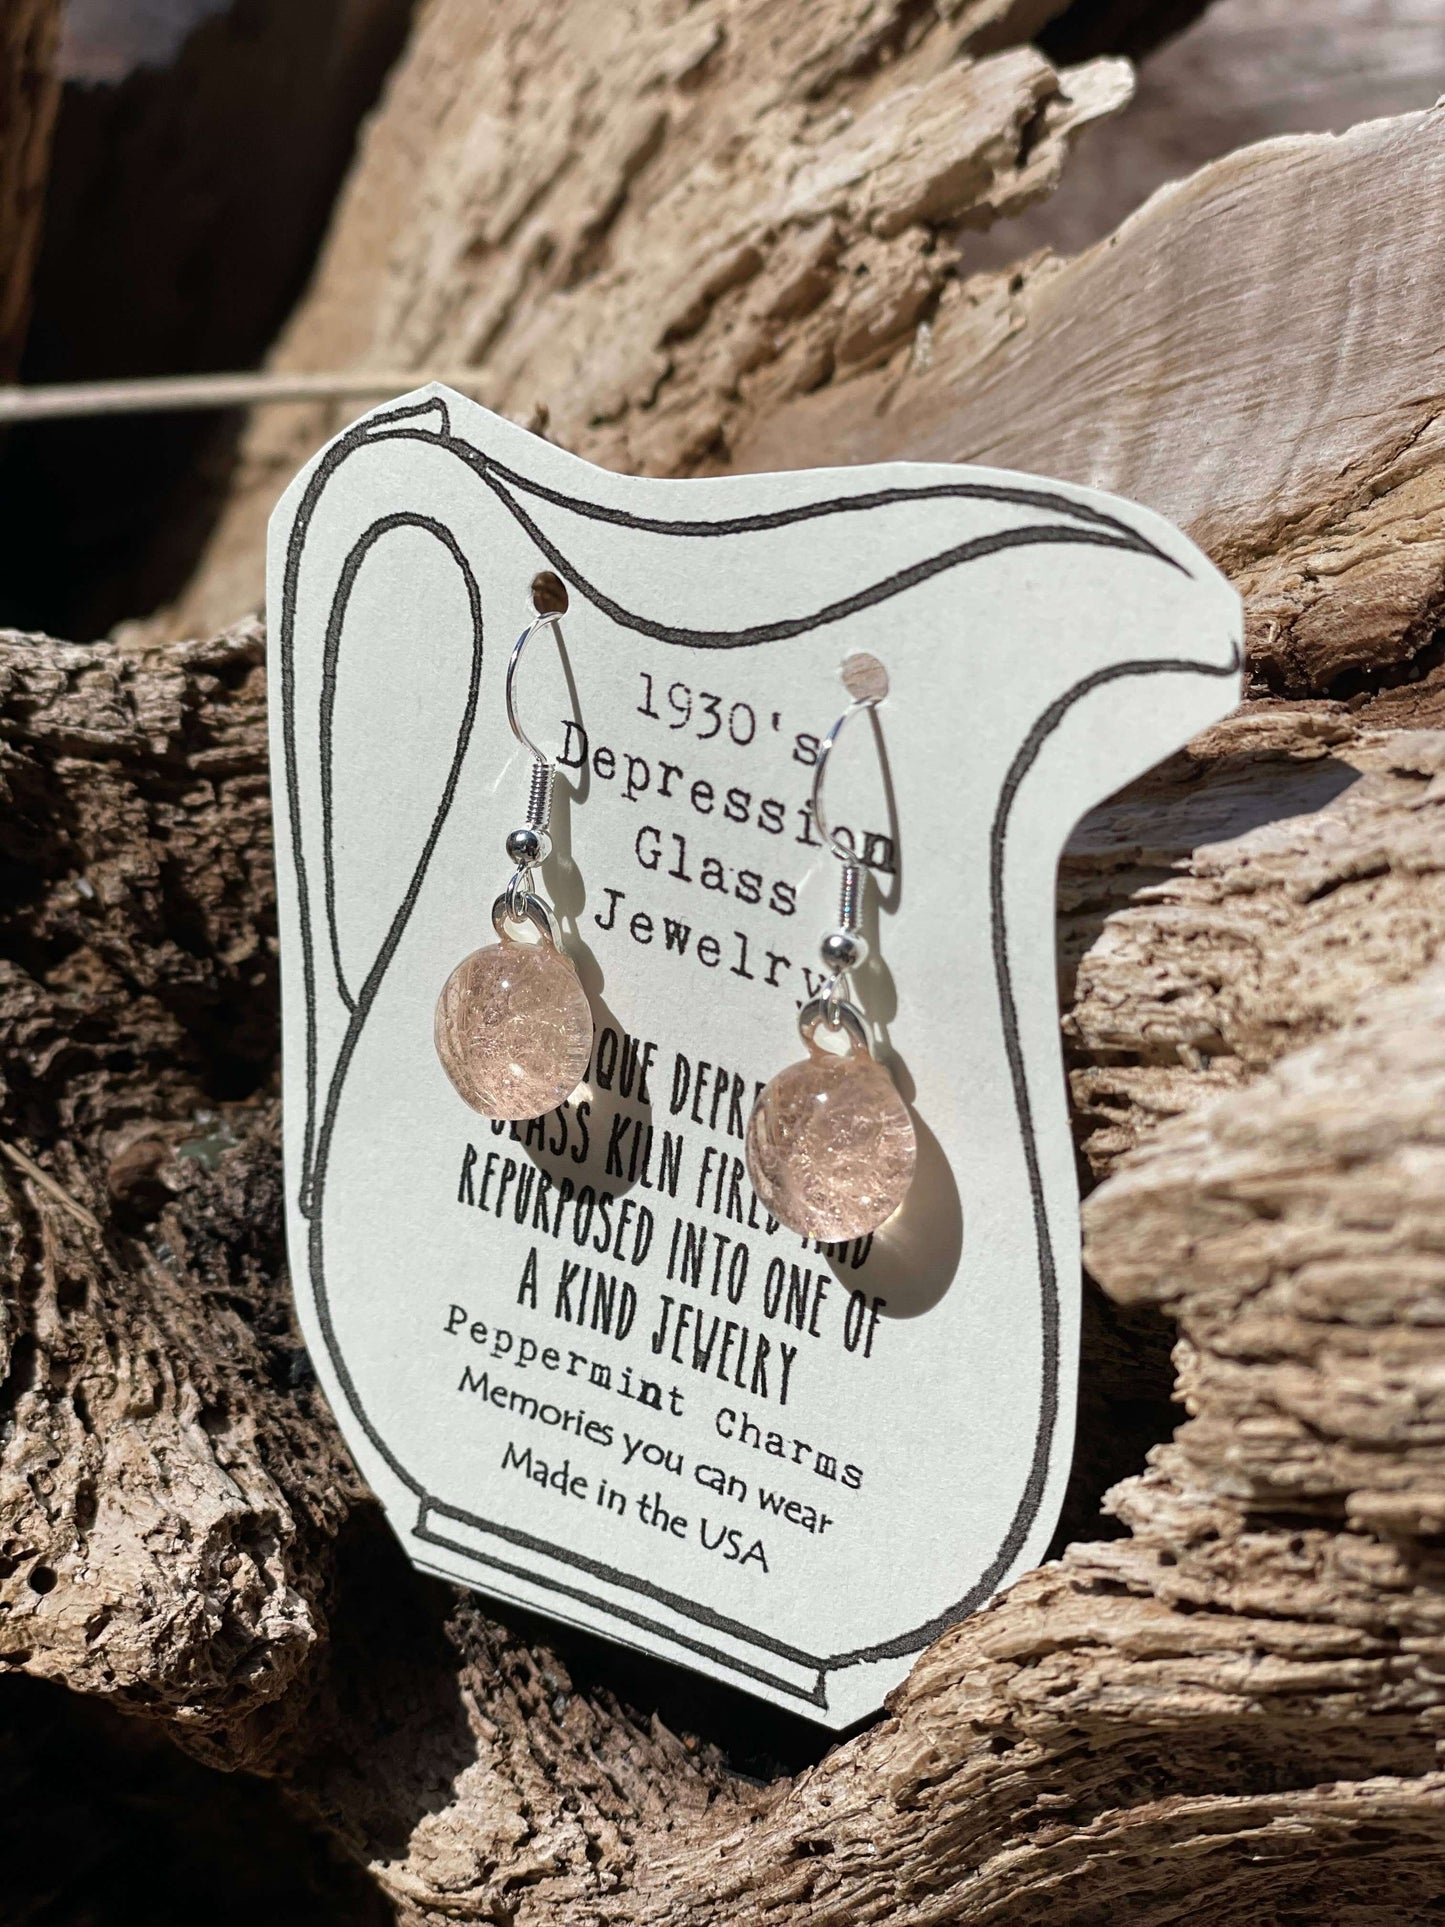 Pink depression glass earrings